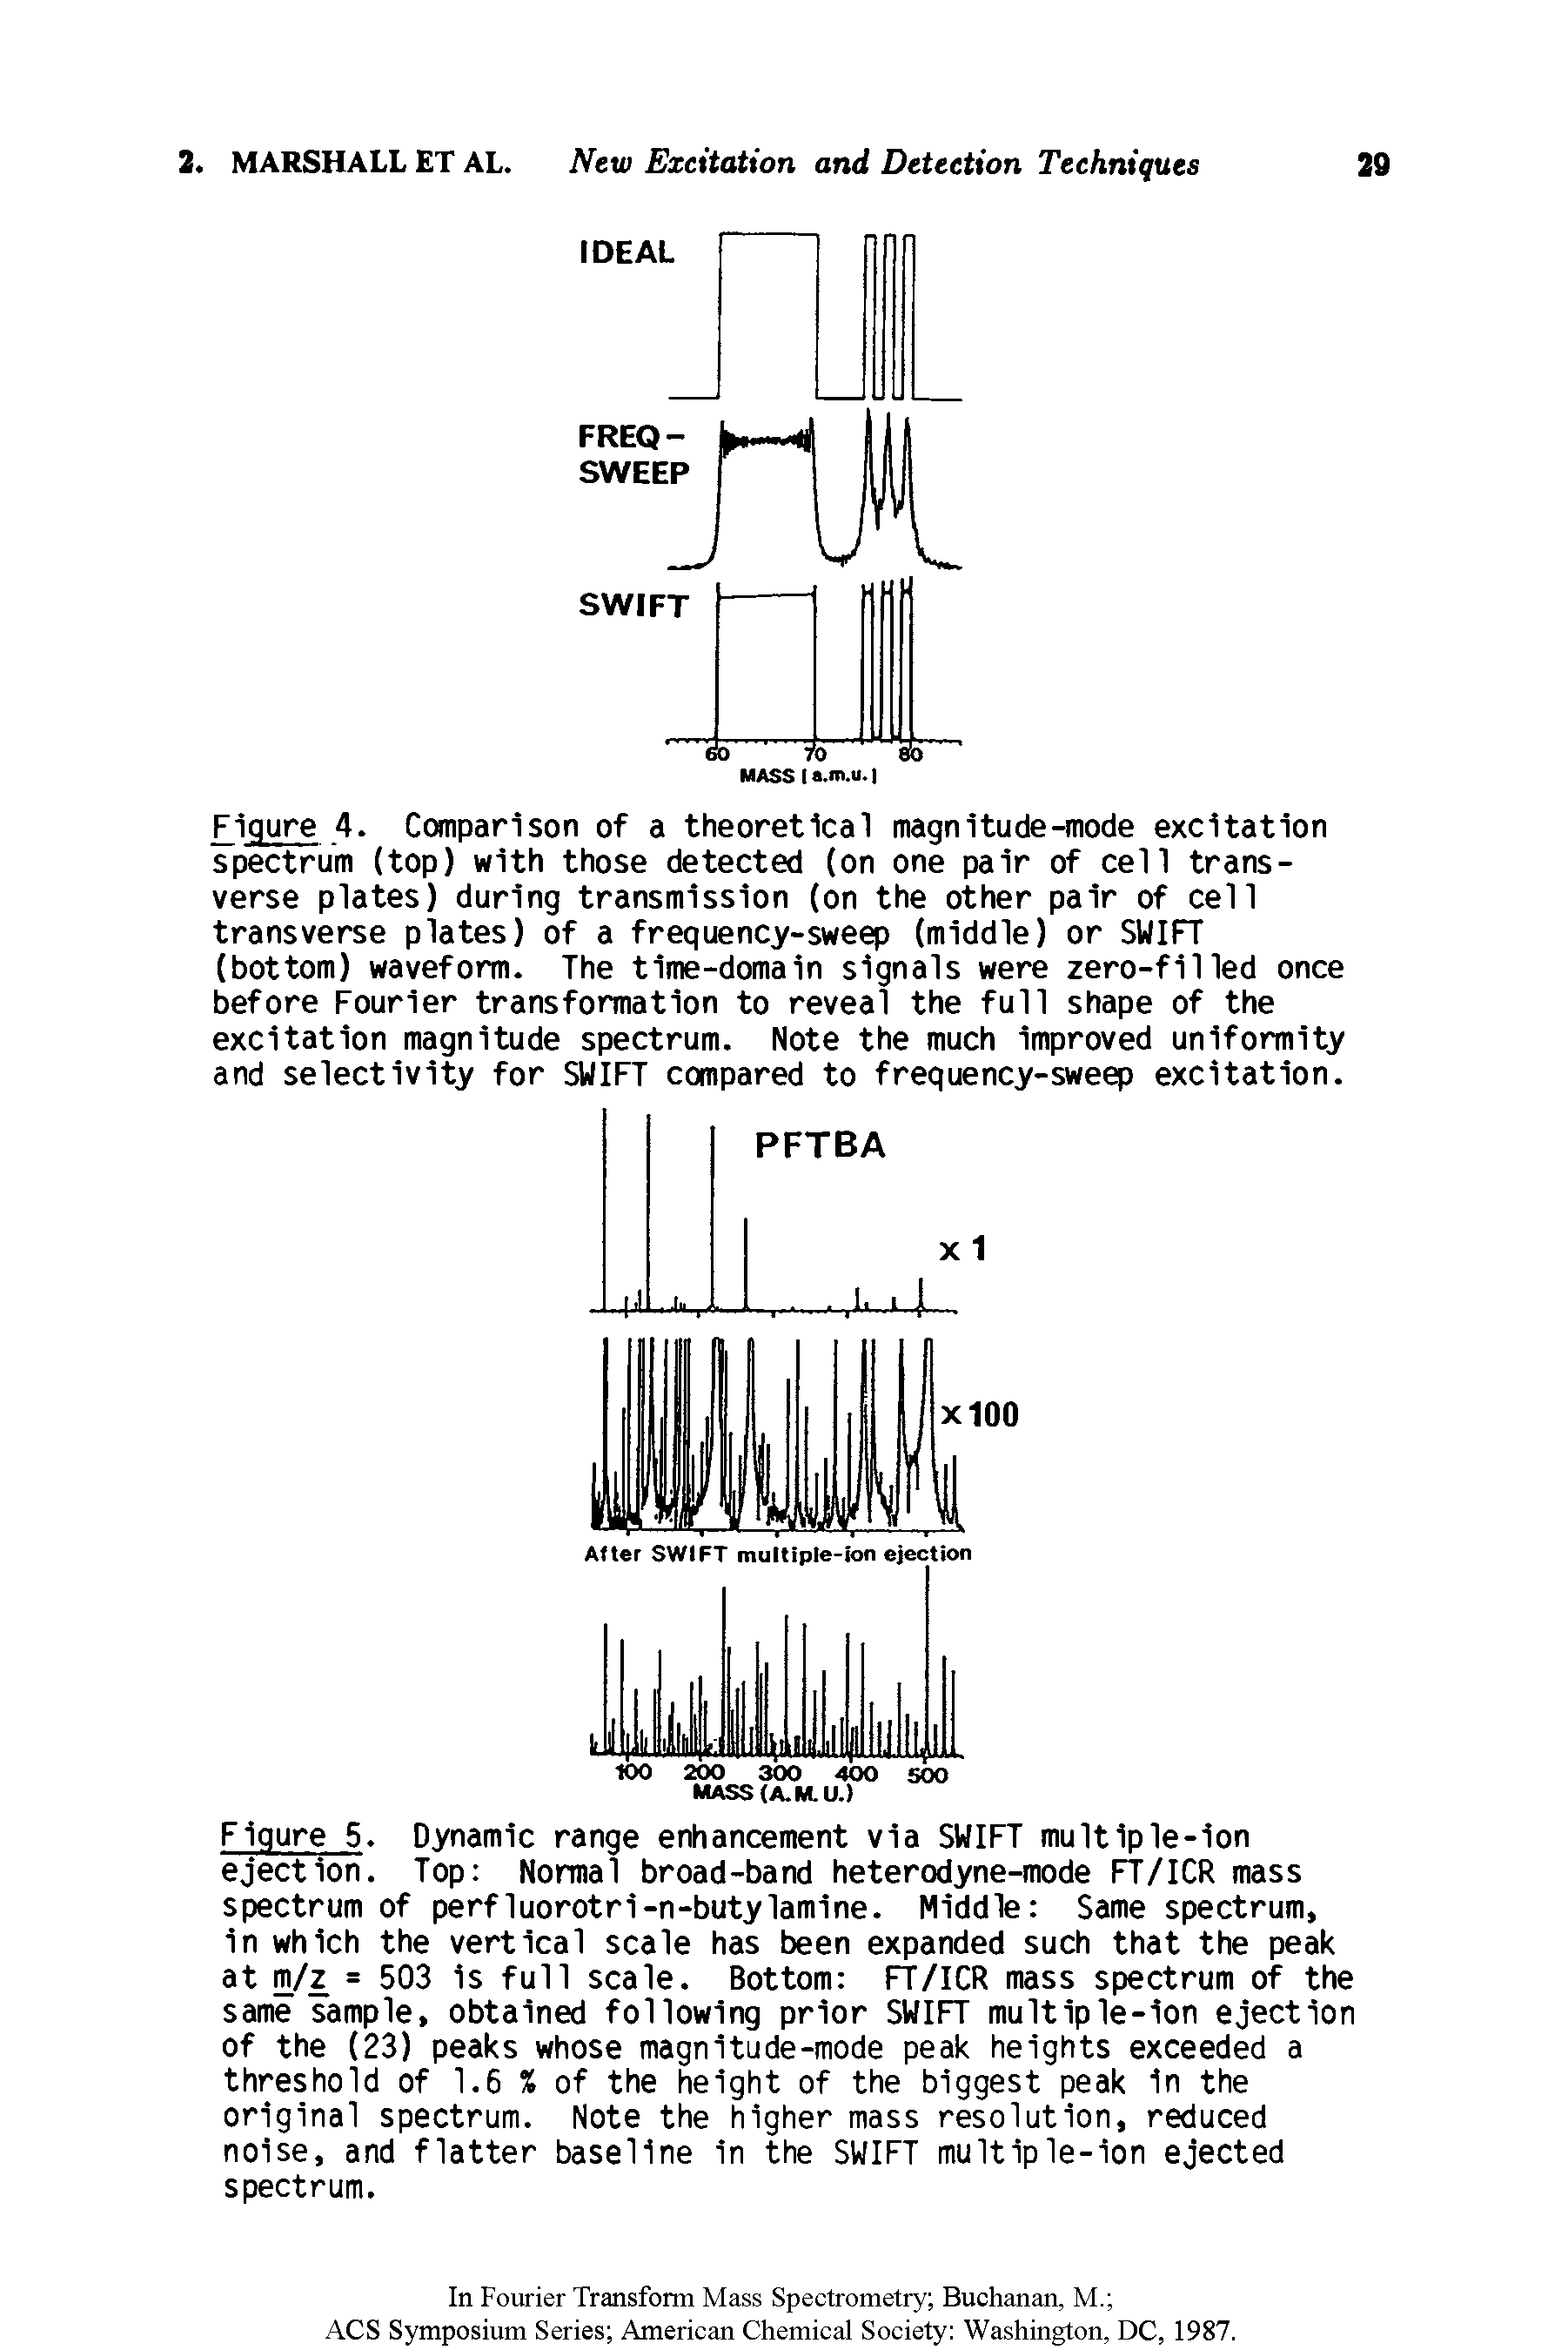 Figure 4. Comparison of a theoretical magnitude-mode excitation spectrum (top) with those detected (on one pair of cell transverse plates) during transmission (on the other pair of cell transverse plates) of a frequency-sweep (middle) or SWIFT (bottom) waveform. The time-domain signals were zero-filled once before Fourier transformation to reveal the full shape of the excitation magnitude spectrum. Note the much improved uniformity and selectivity for SWIFT compared to frequency-sweep excitation.